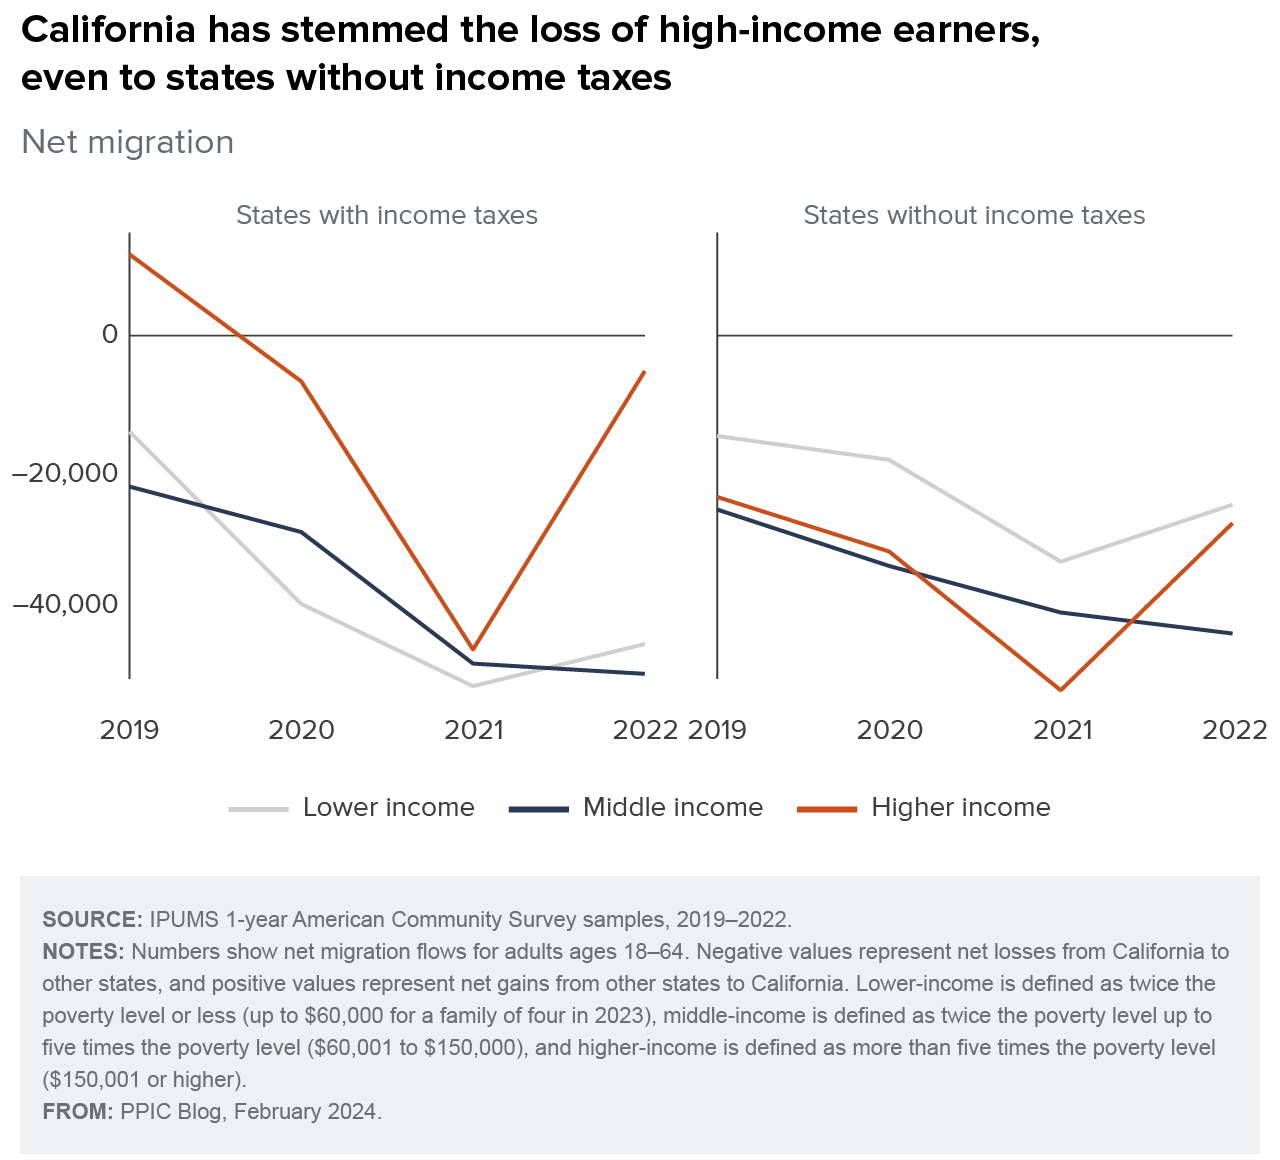 figure - California has stemmed the loss of high-income earners, even to states without income taxes